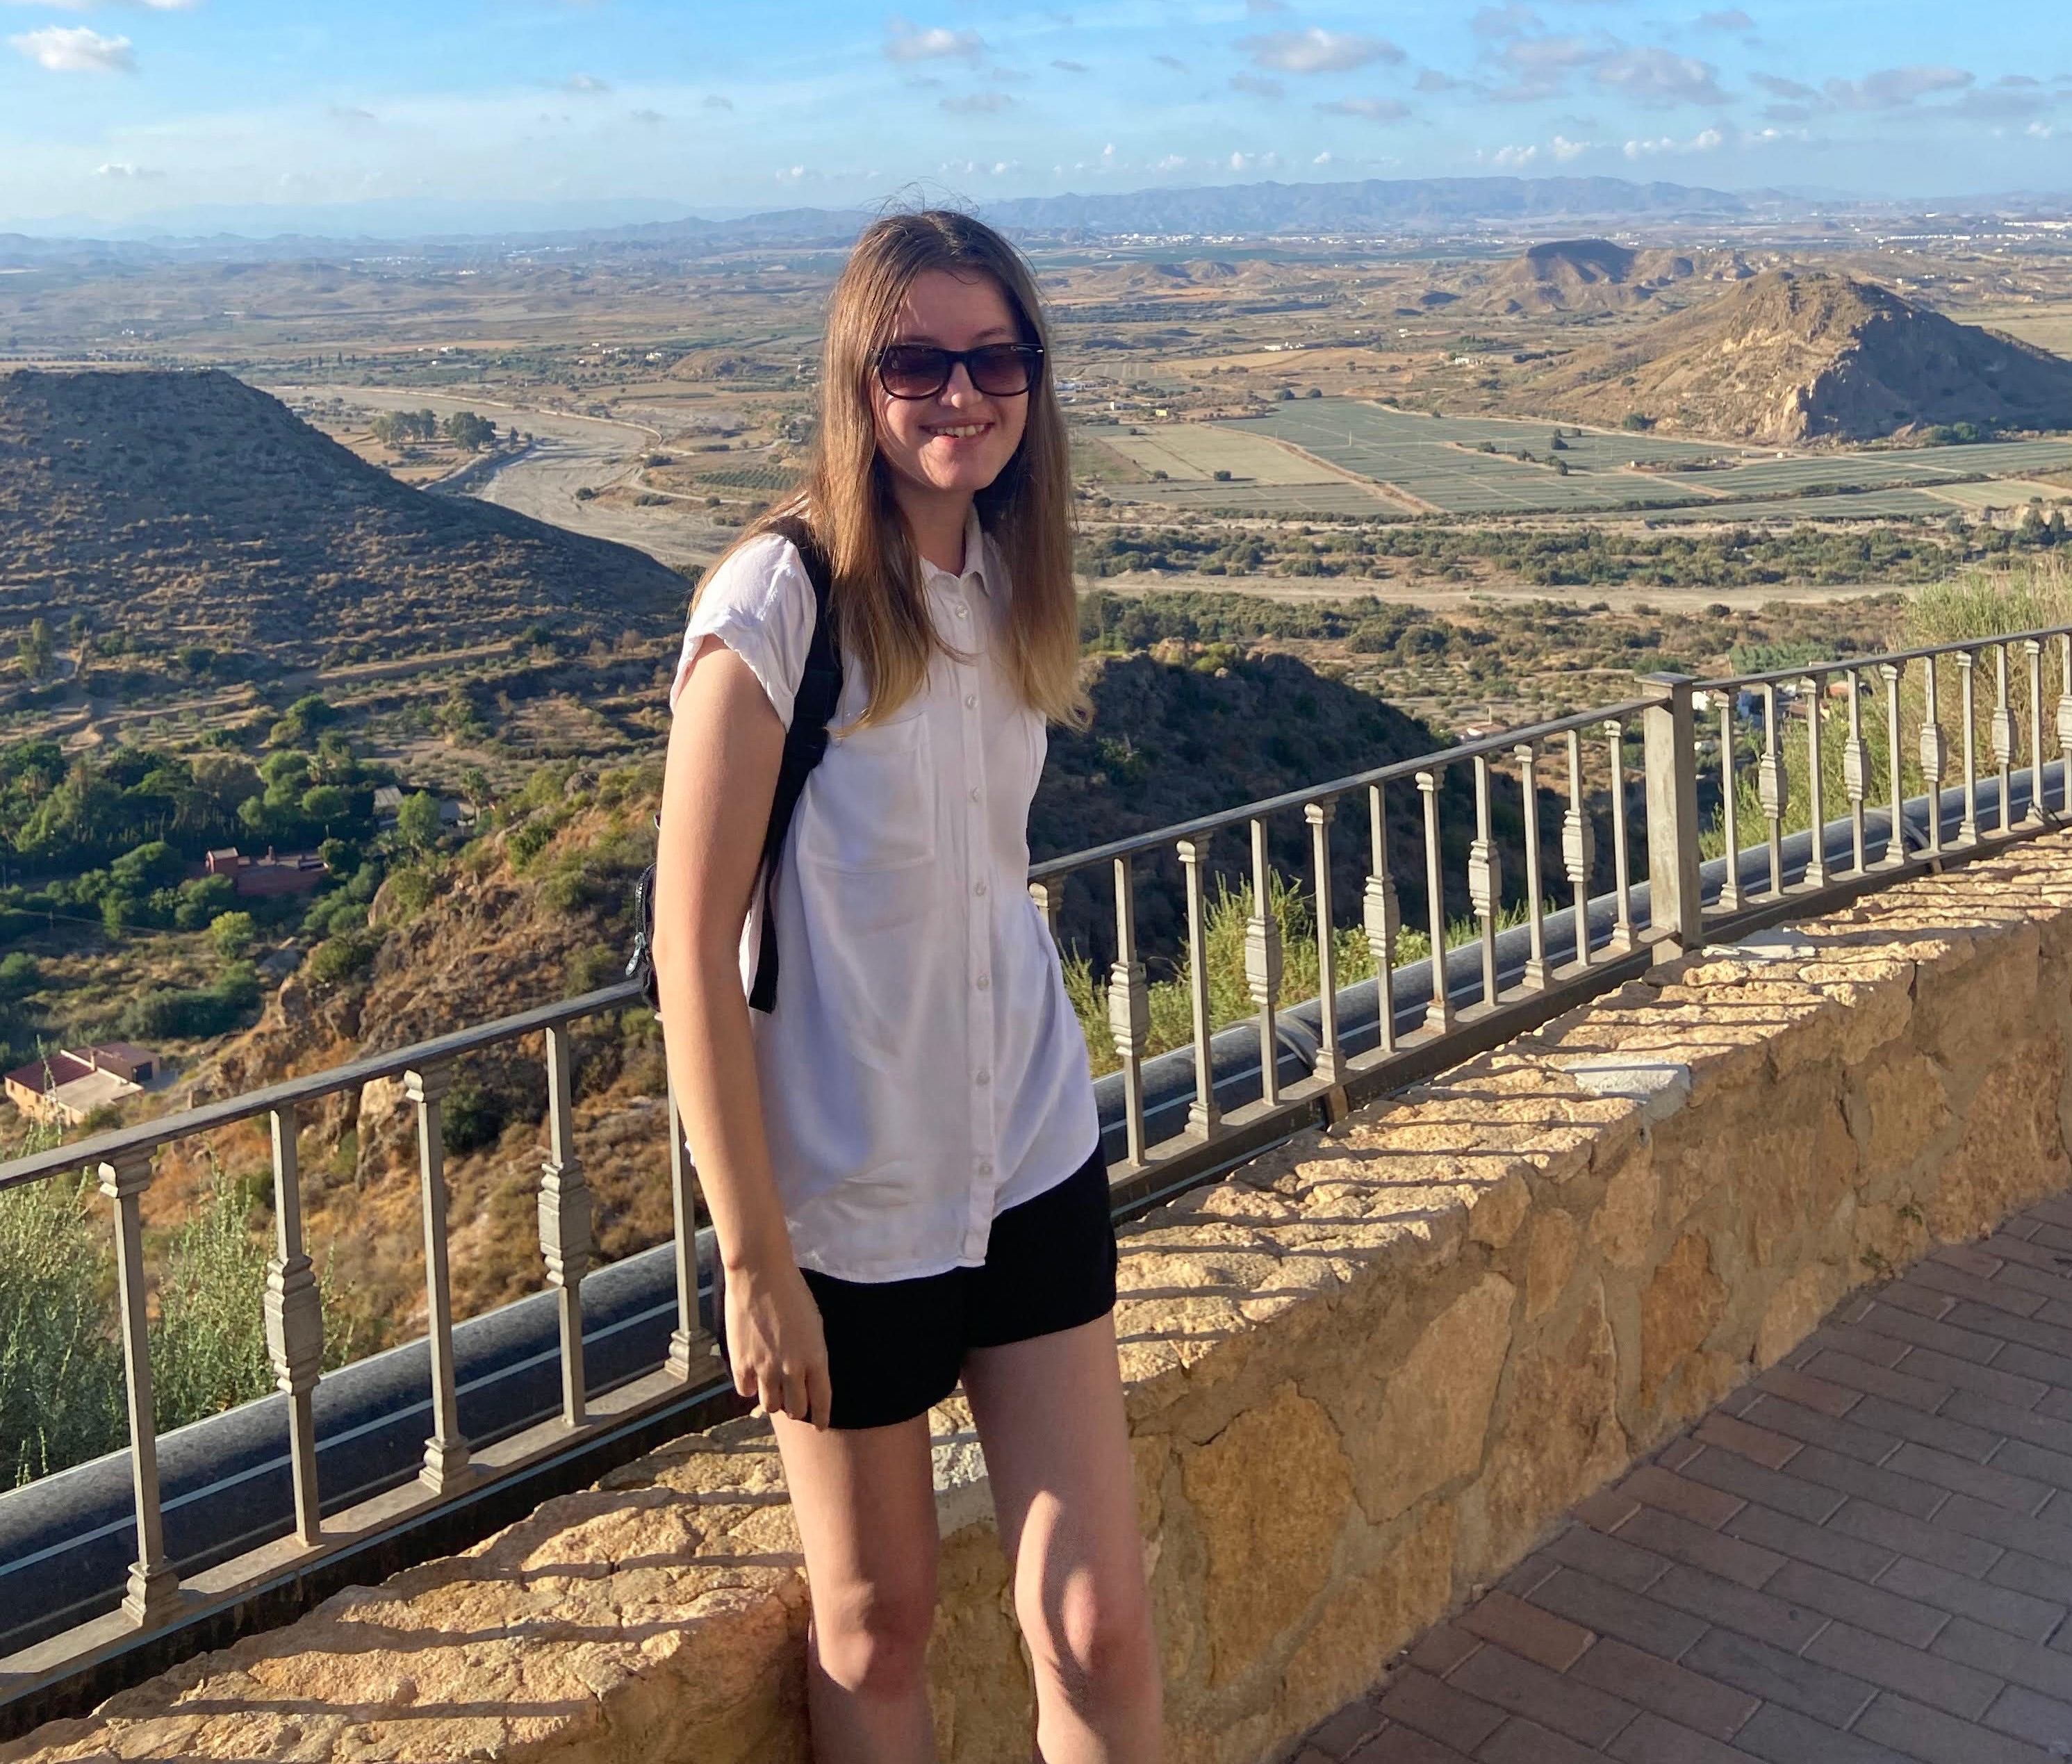 Profile picture of Charlotte Maynard - She is standing infront of a landscape in Mojacar, Spain.